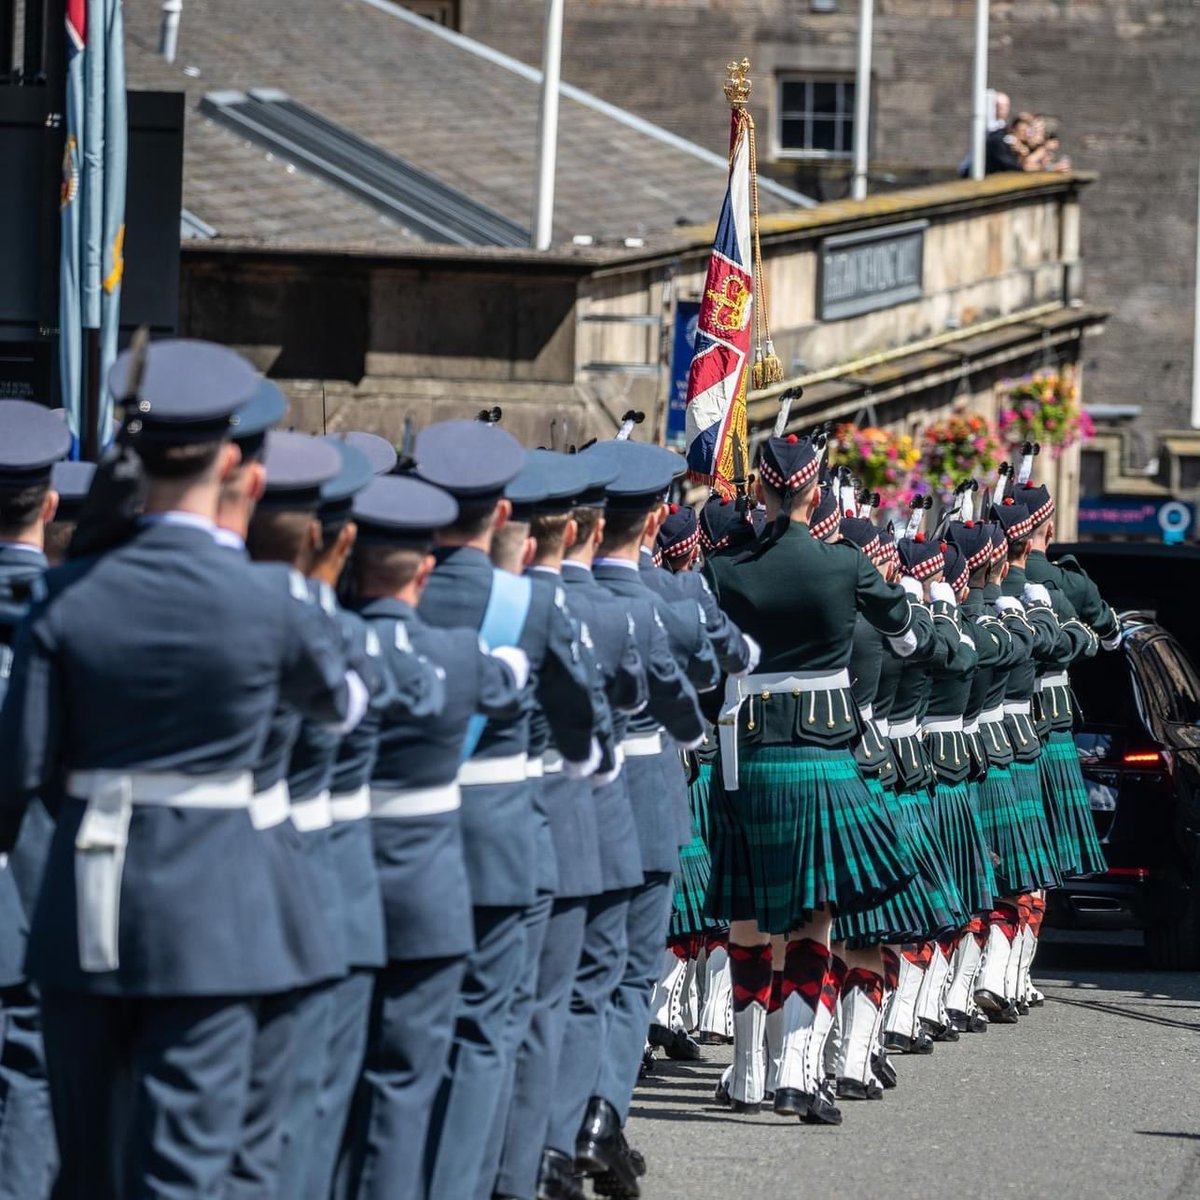 📢 A big shout out to our brilliant #TeamLossie visual communicators who were on the ground as The King was presented with the Honours of Scotland in Edinburgh yesterday. They captured some truly historic moments. 📸